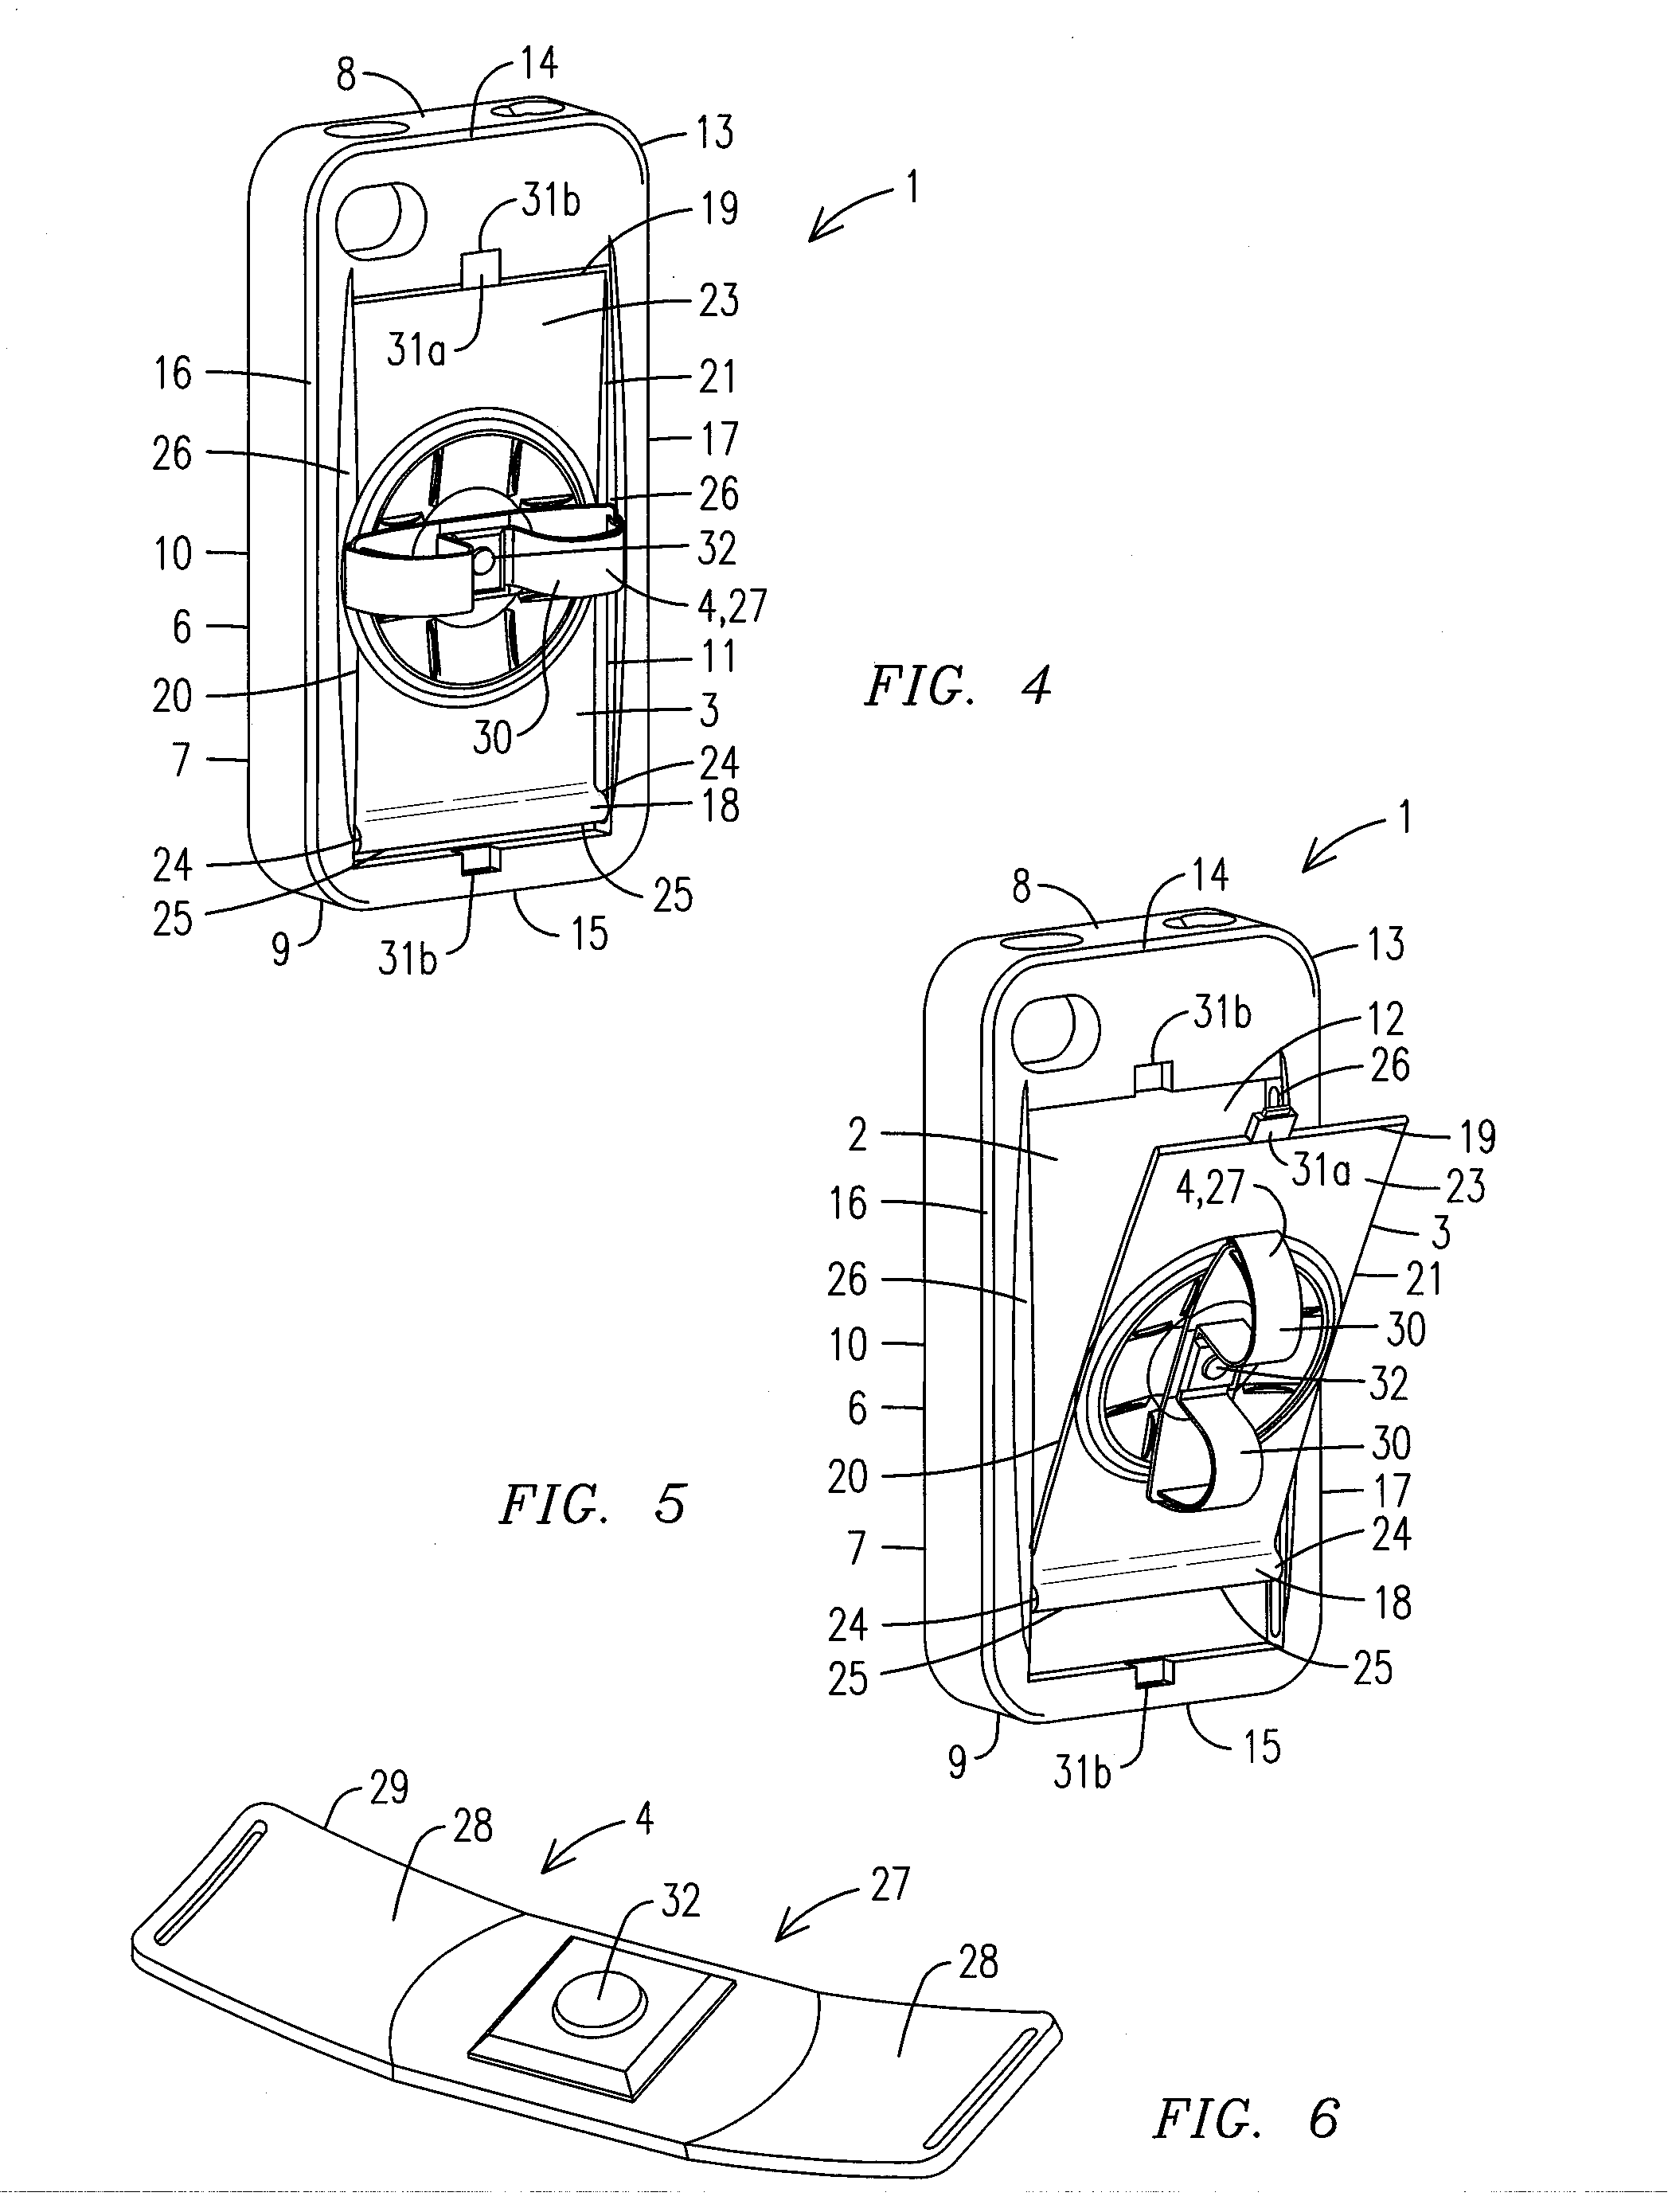 Protective case for electronic devices